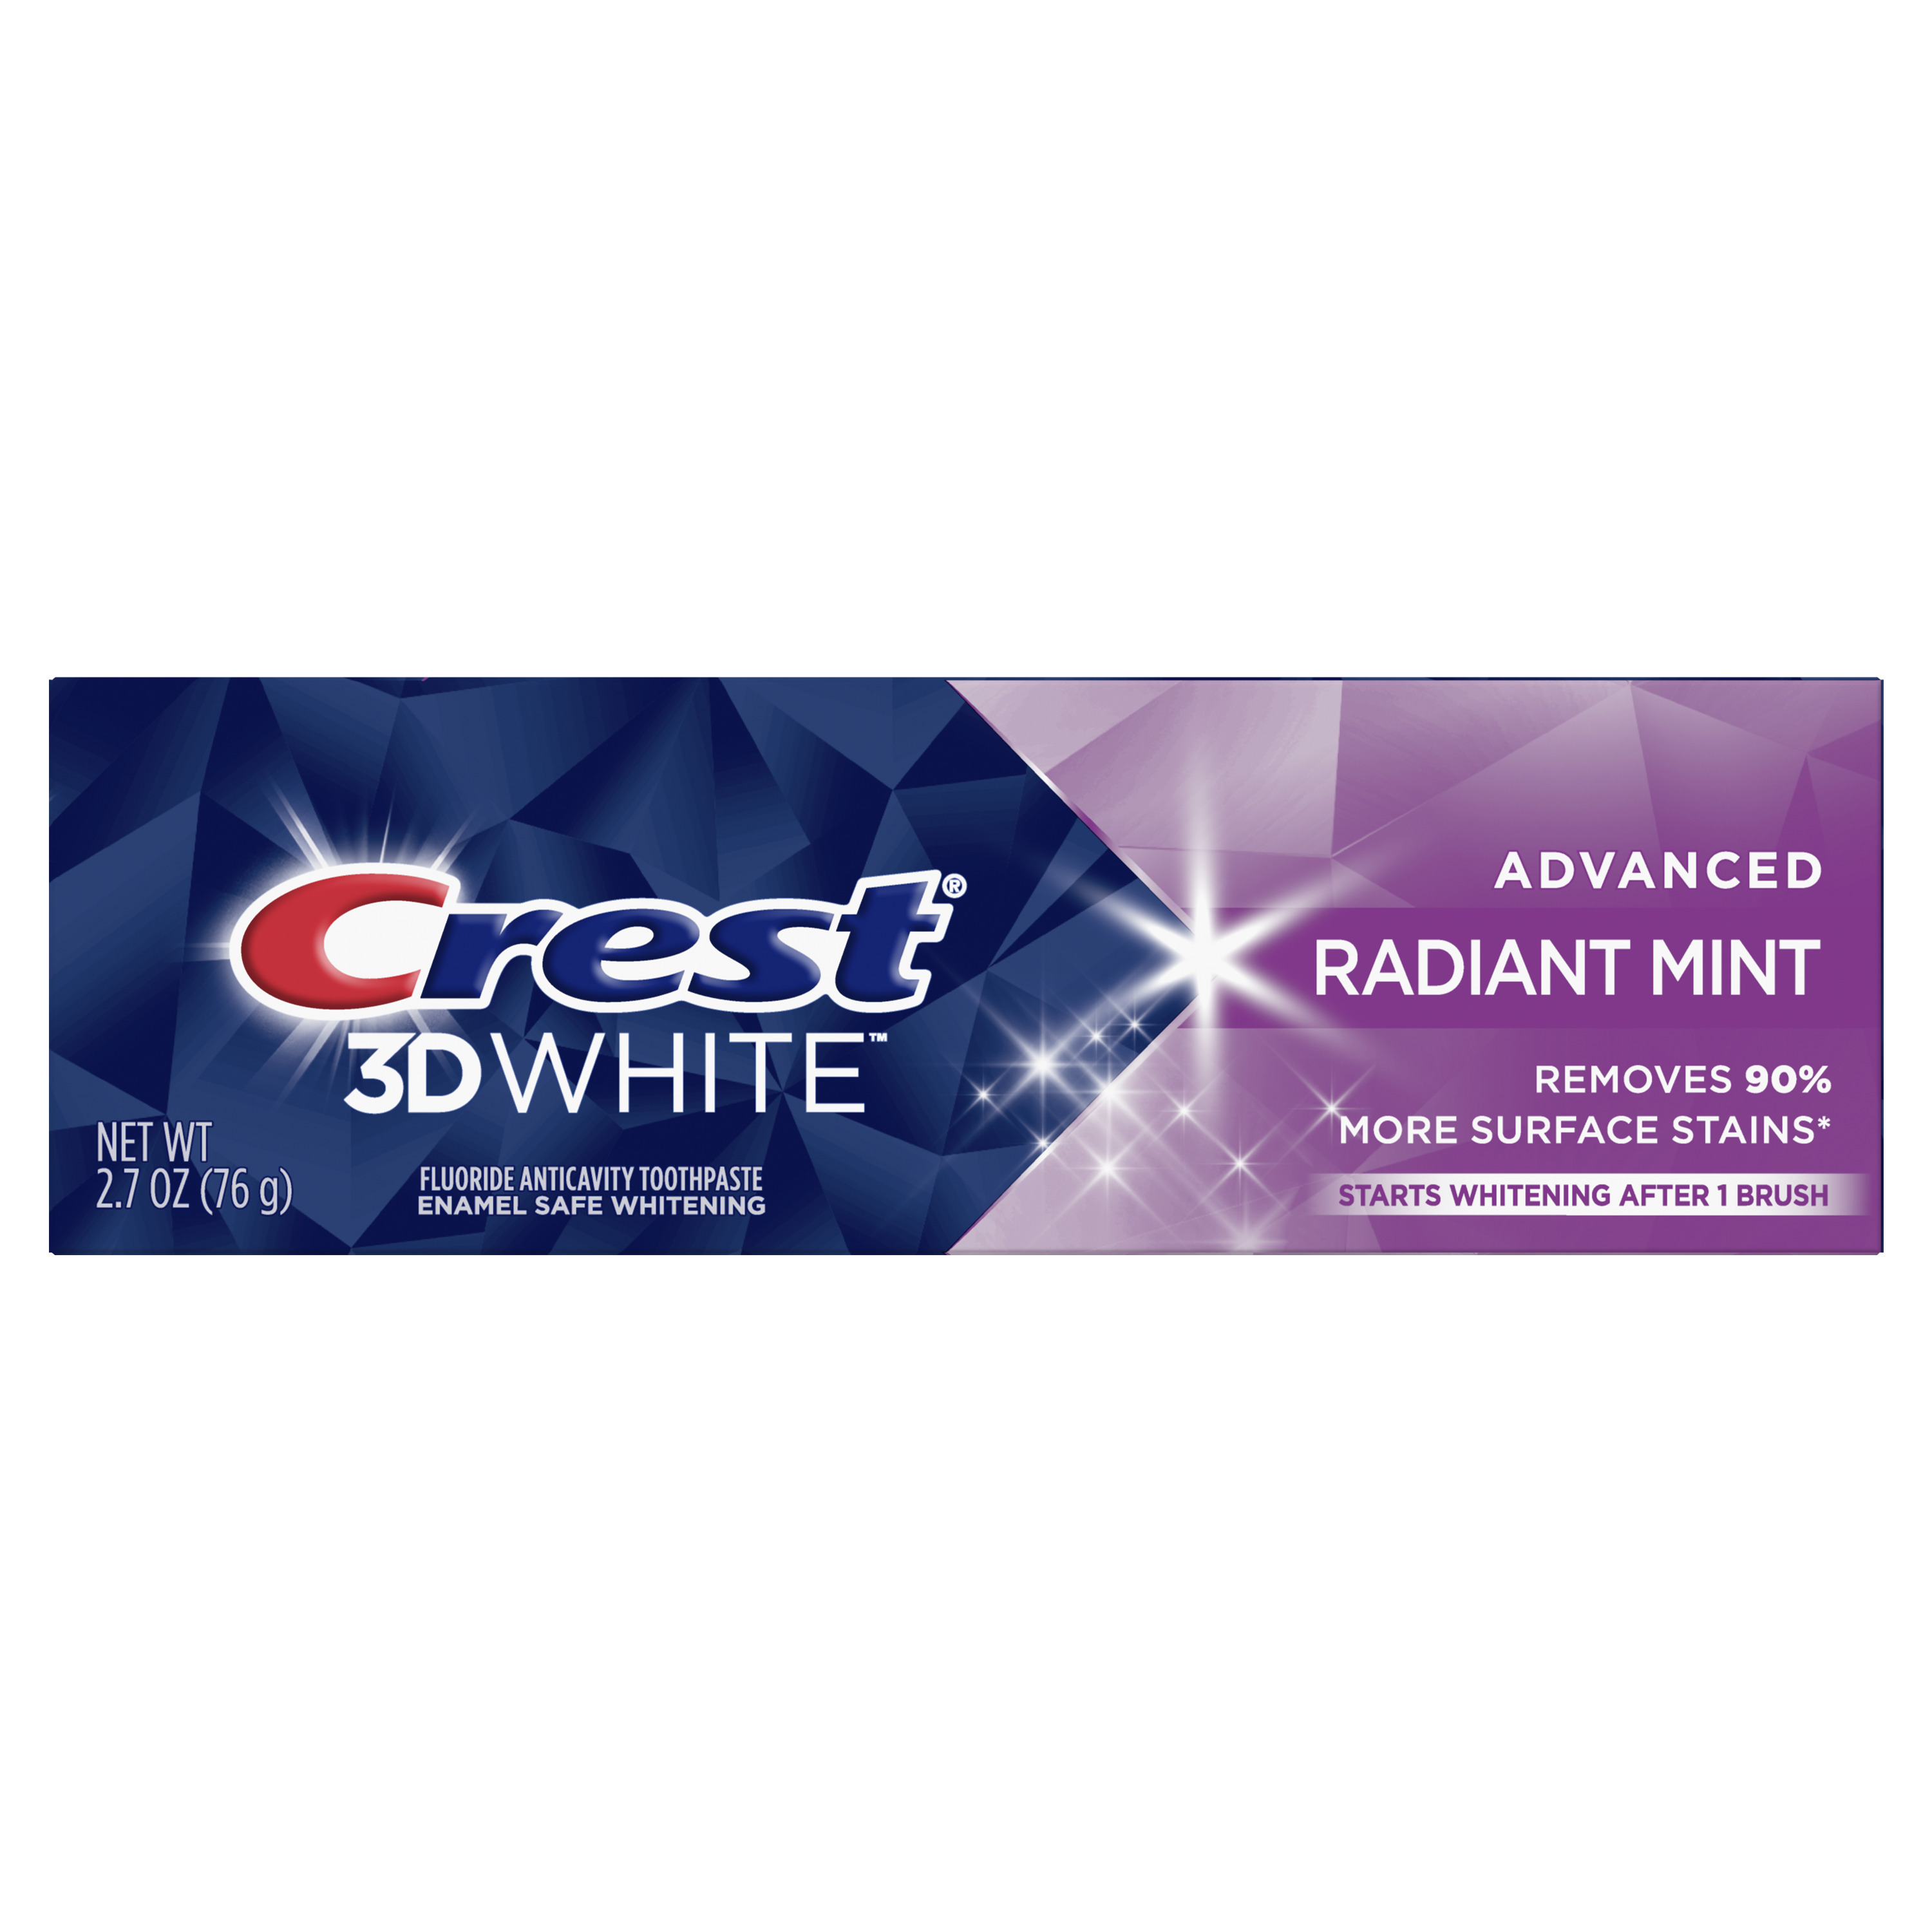 Crest 3D White Advanced Radiant Mint Whitening Toothpaste, 2.7 oz - image 2 of 9